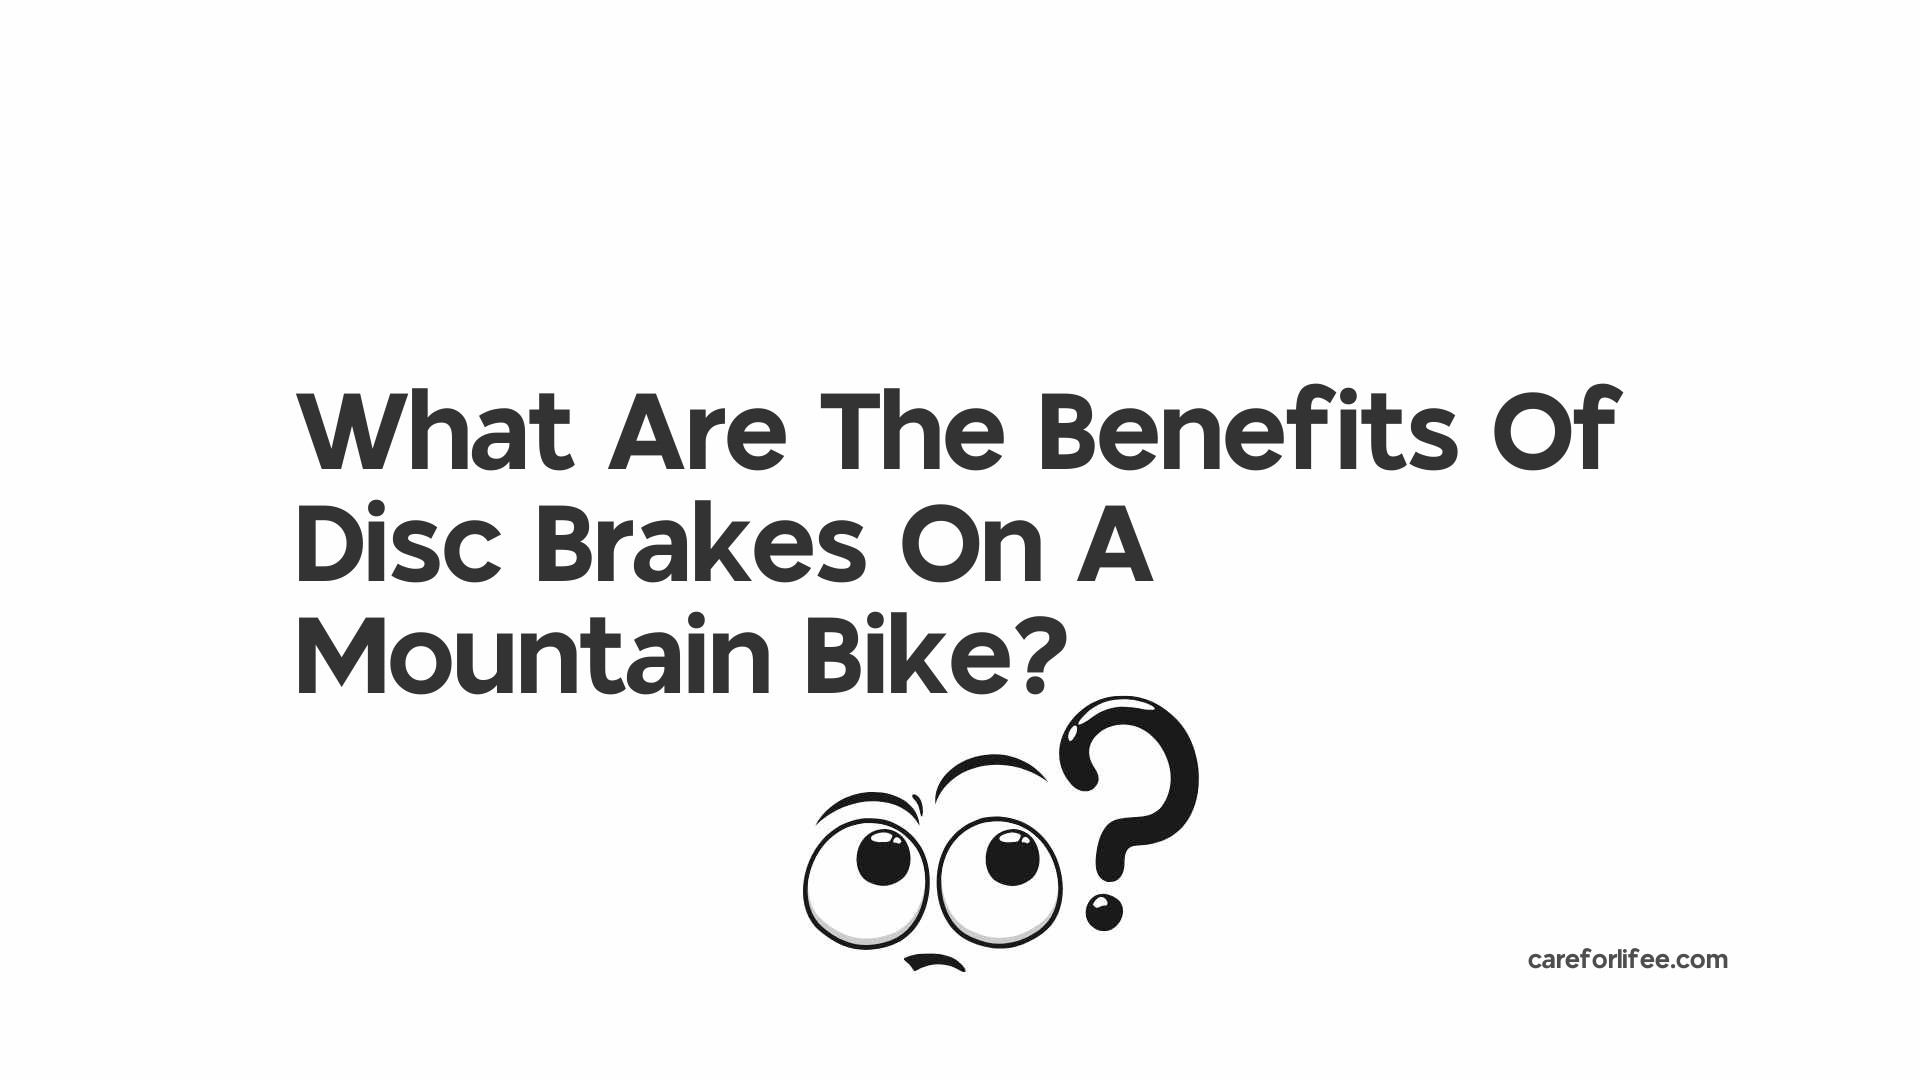 What Are The Benefits Of Disc Brakes On A Mountain Bike?